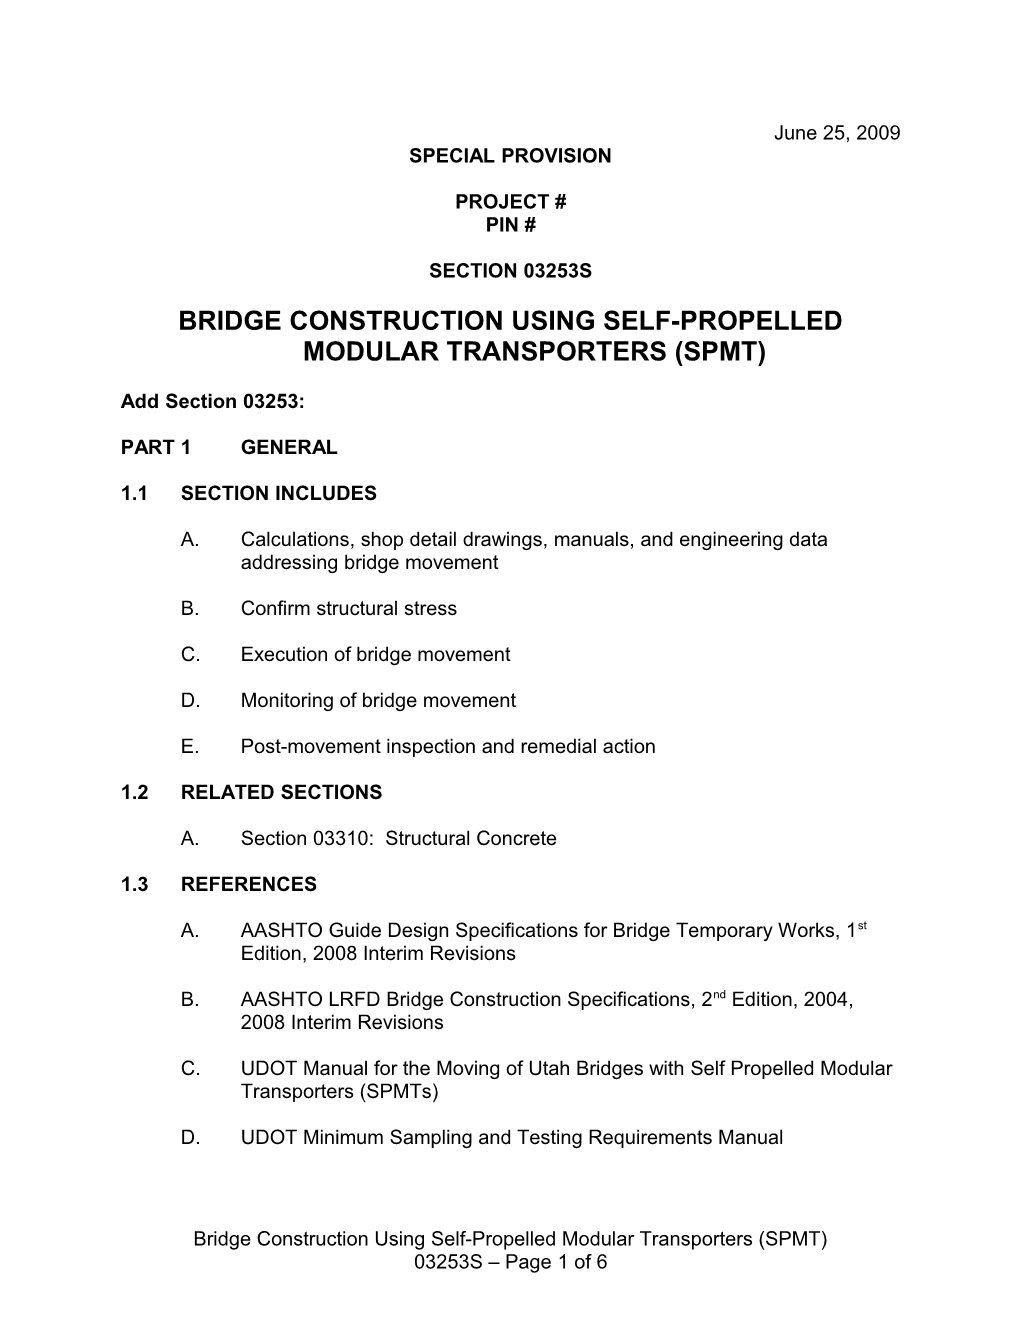 Structures Special Provision, Section 03253 - Bridge Construction Using Self-Propelled